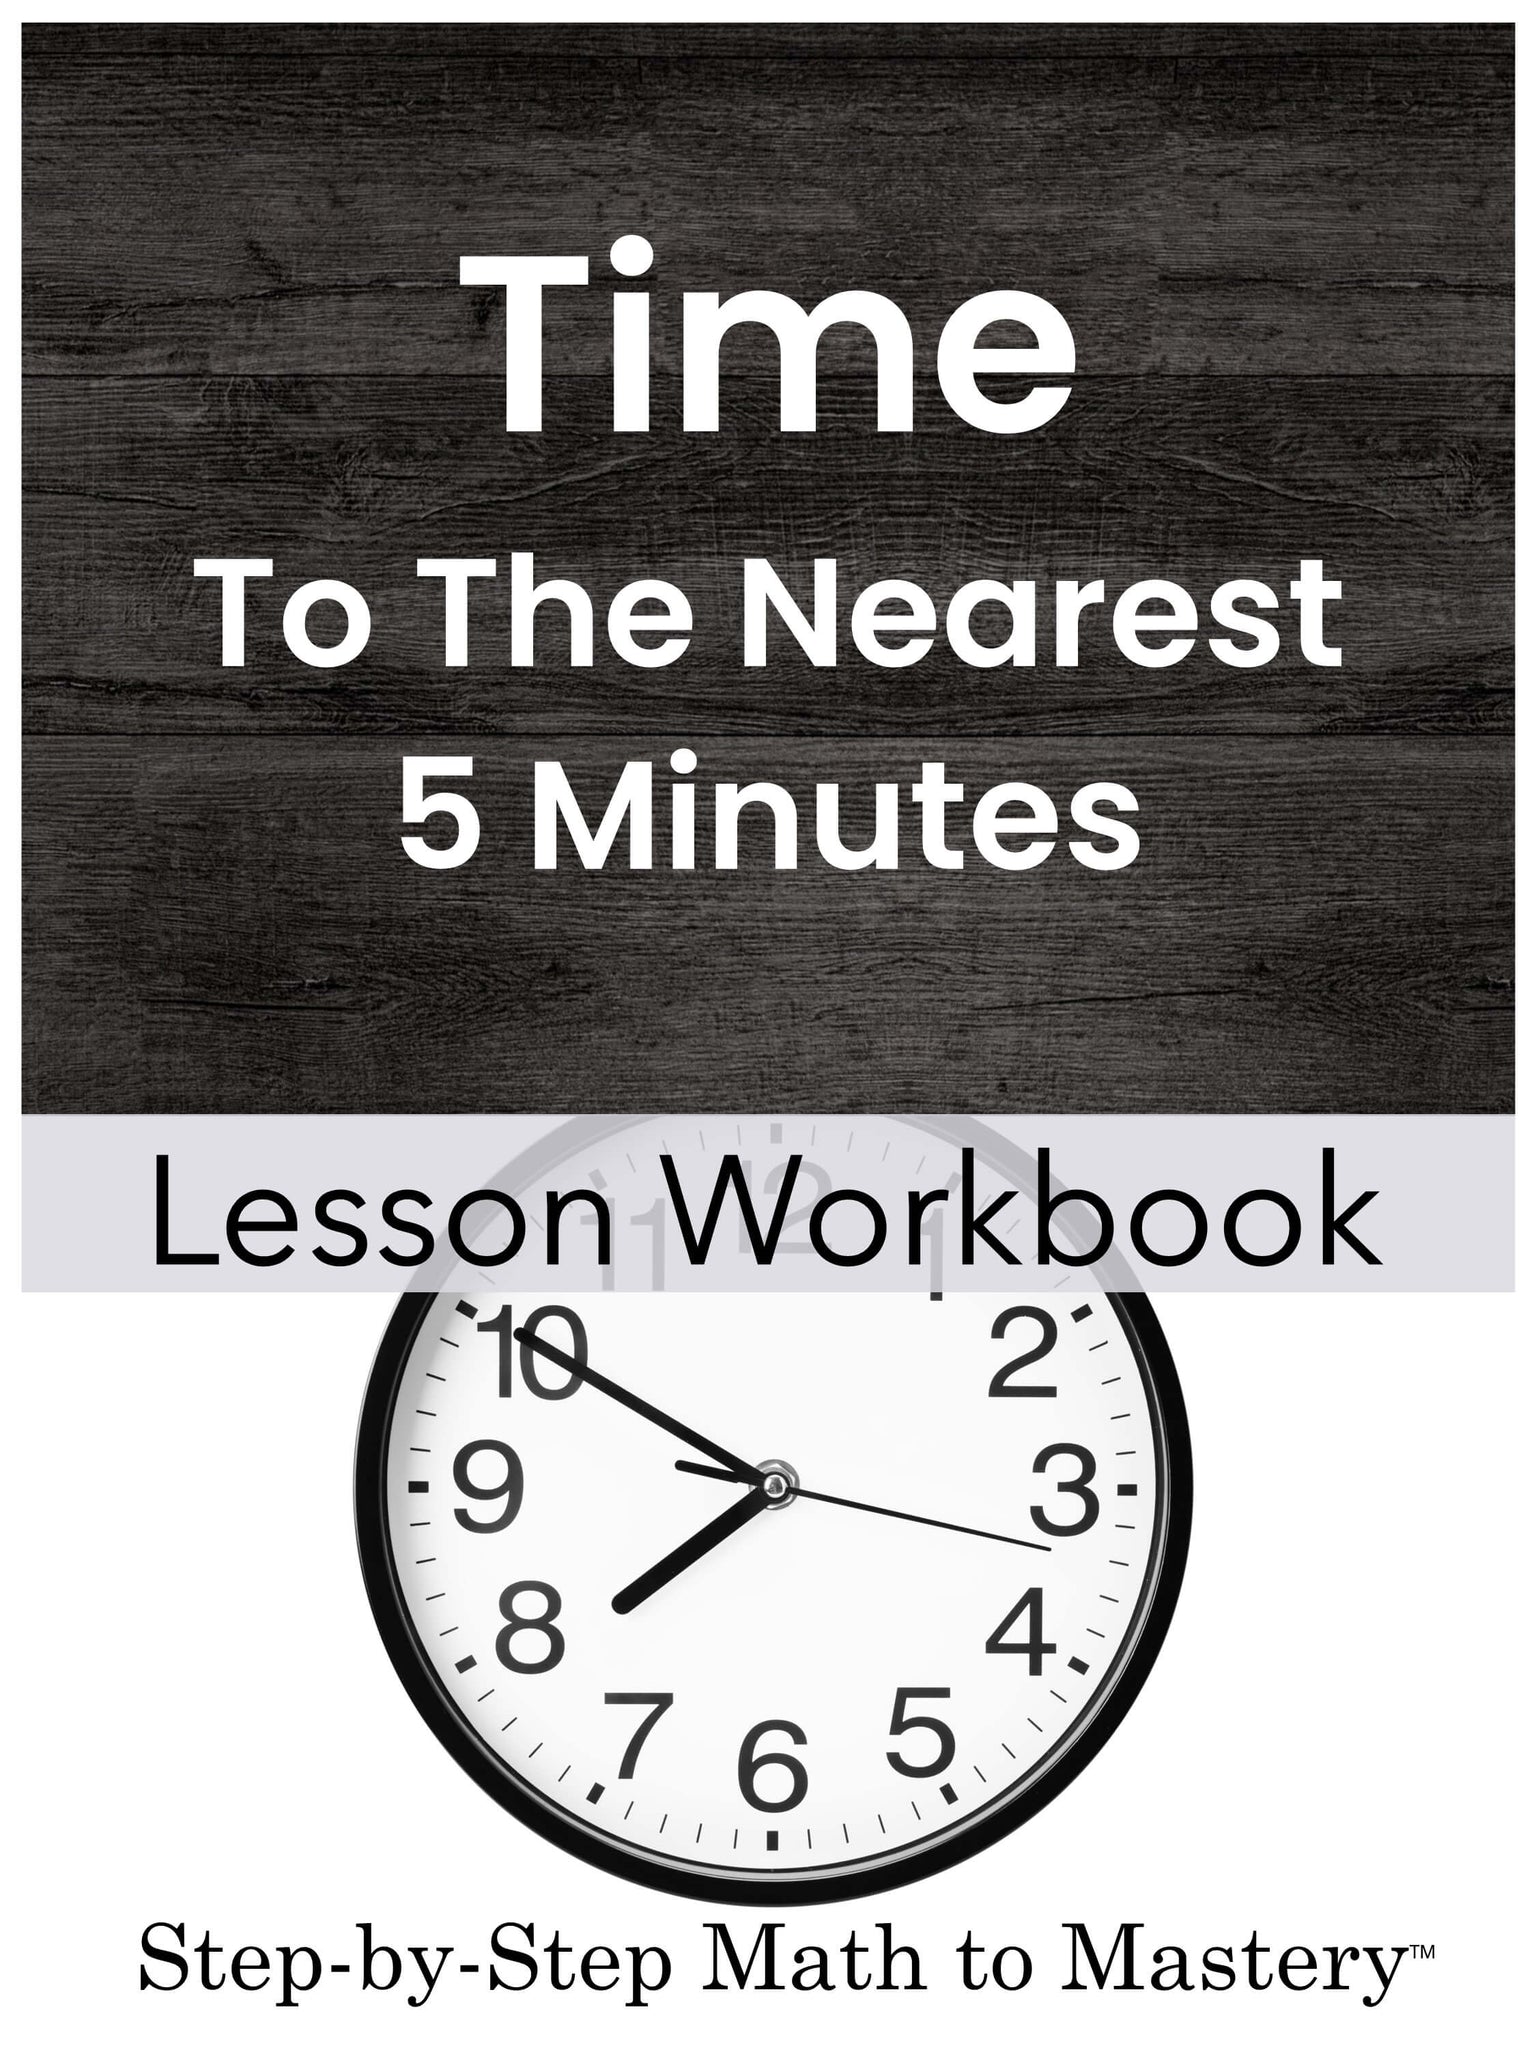 Telling time worksheet. write the time shown on the clock Stock